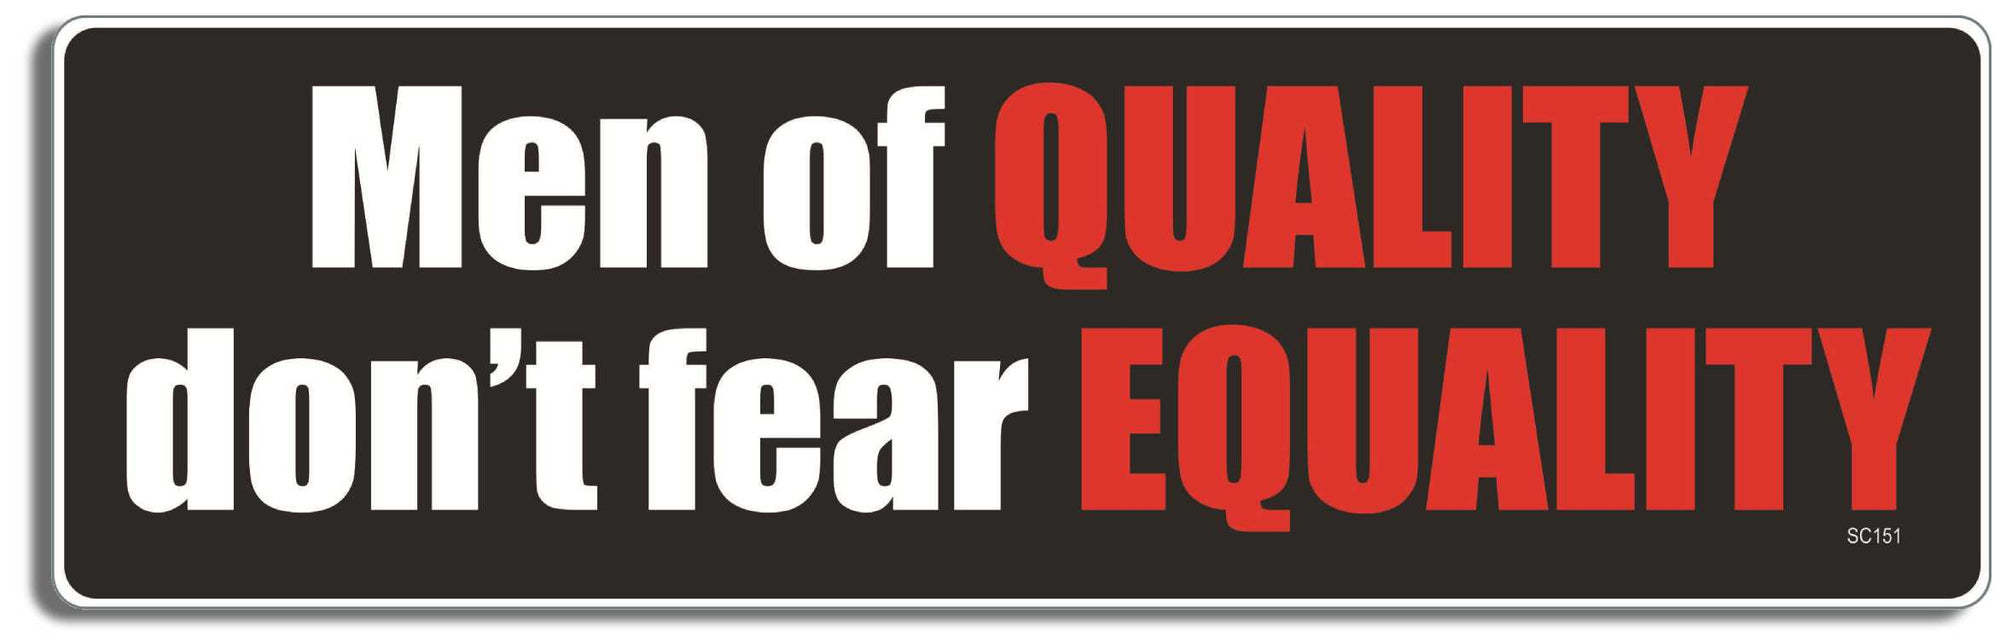 Men of quality don't fear equality -  3" x 10" Bumper Sticker--Car Magnet- -  Decal Bumper Sticker-political Bumper Sticker Car Magnet Men of quality don't fear equality-  Decal for cars#resistance, democrat, equal rights, feminism, liberal, resist